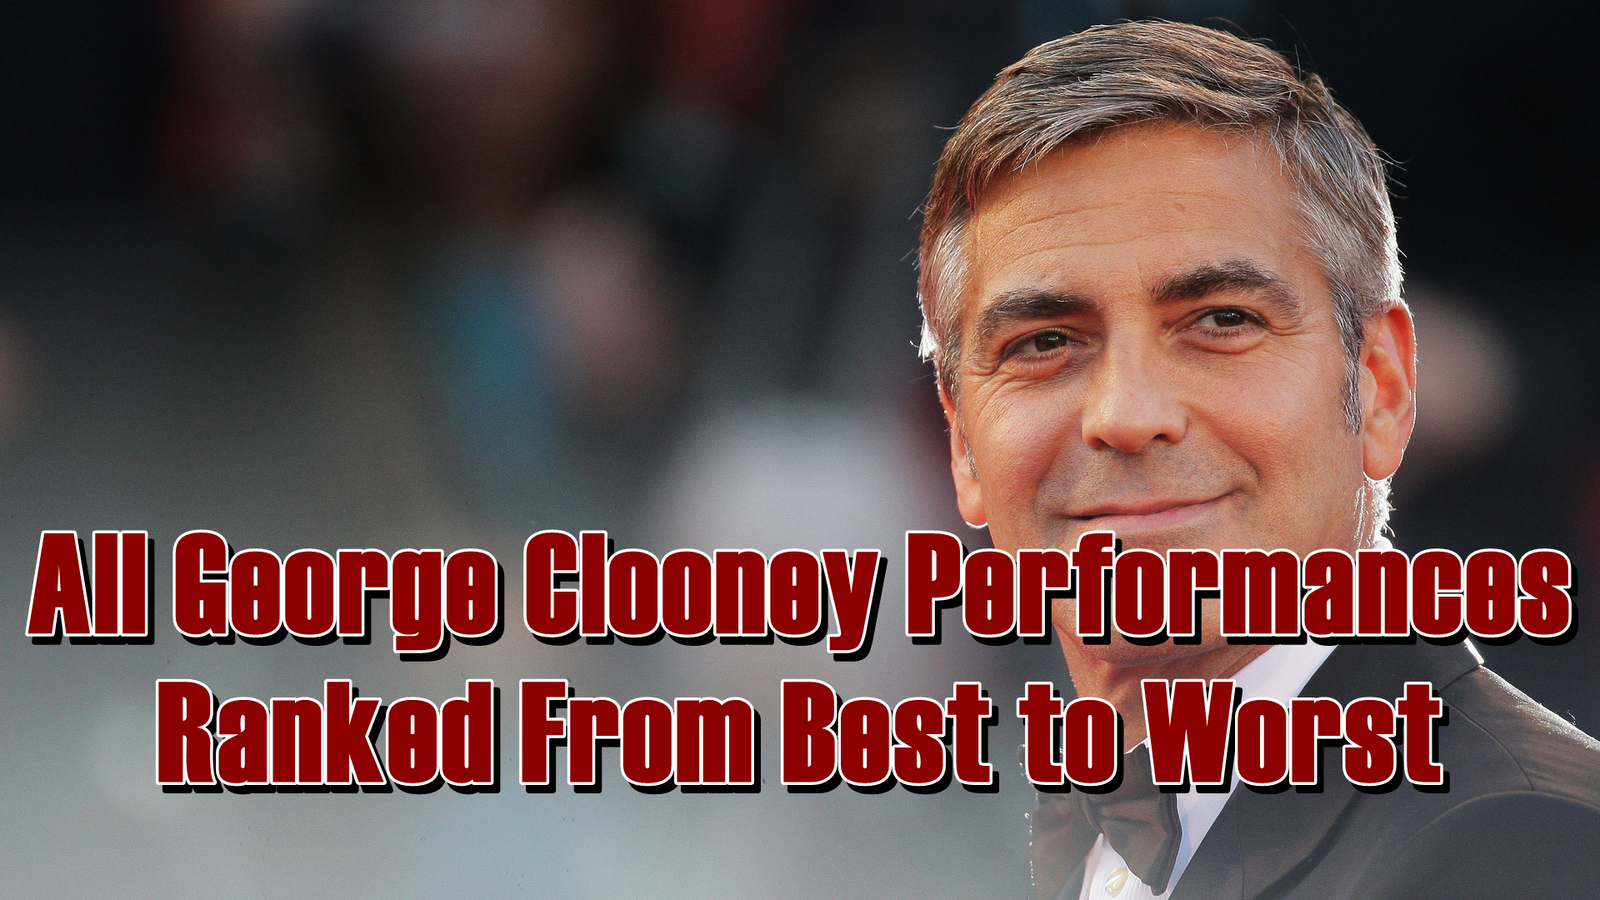 All George Clooney Performances Ranked From Best to Worst